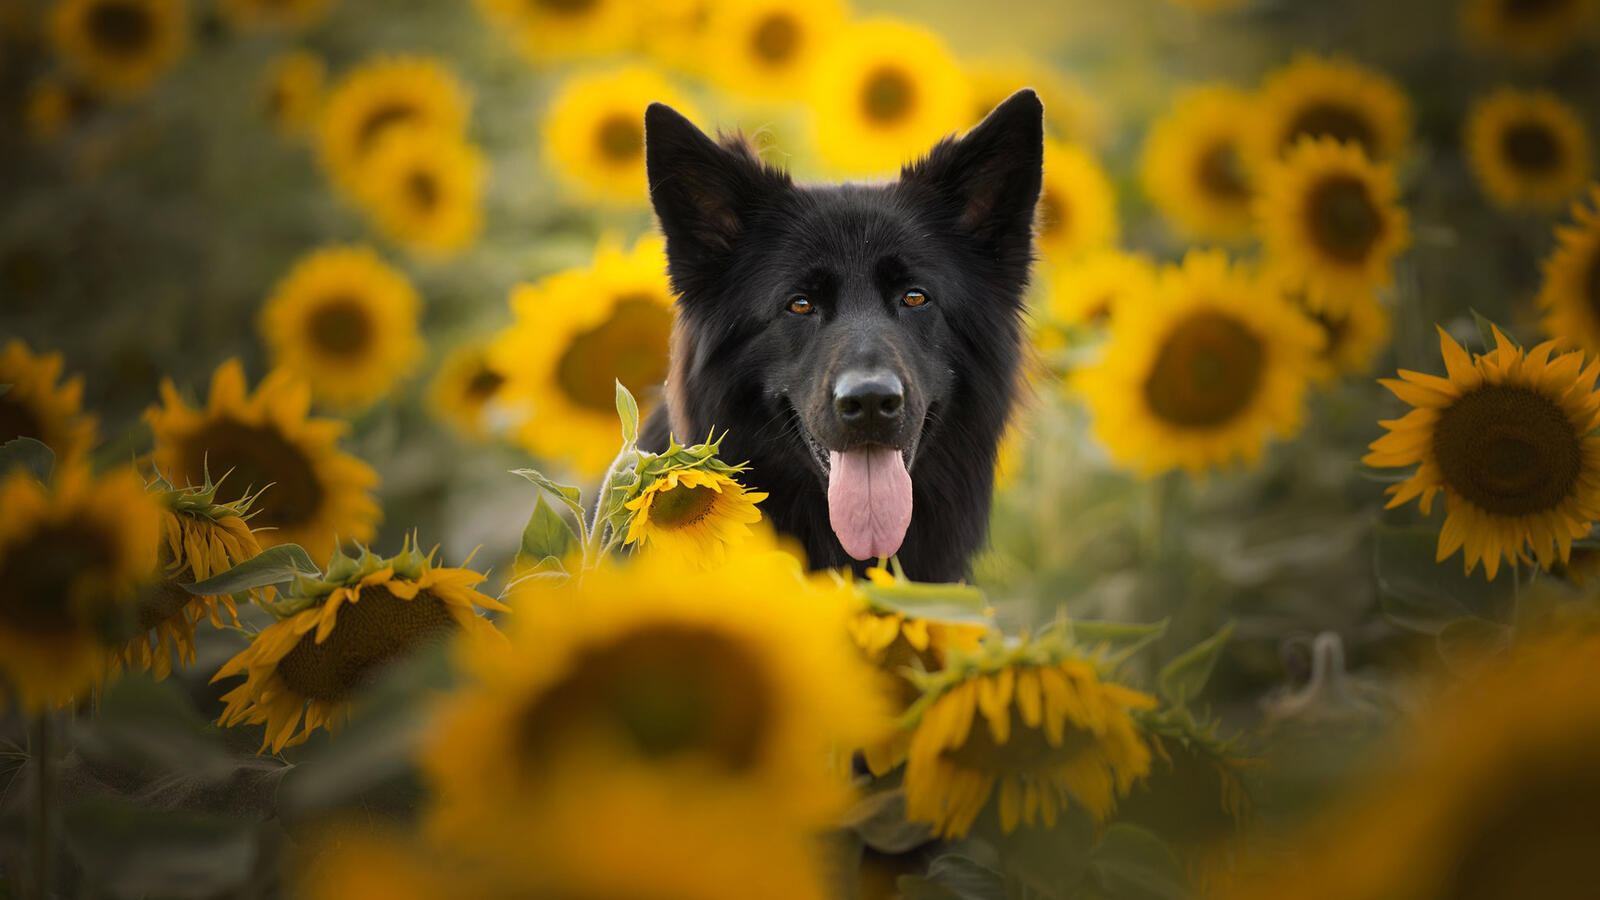 Free photo A black dog running through a field of sunflowers